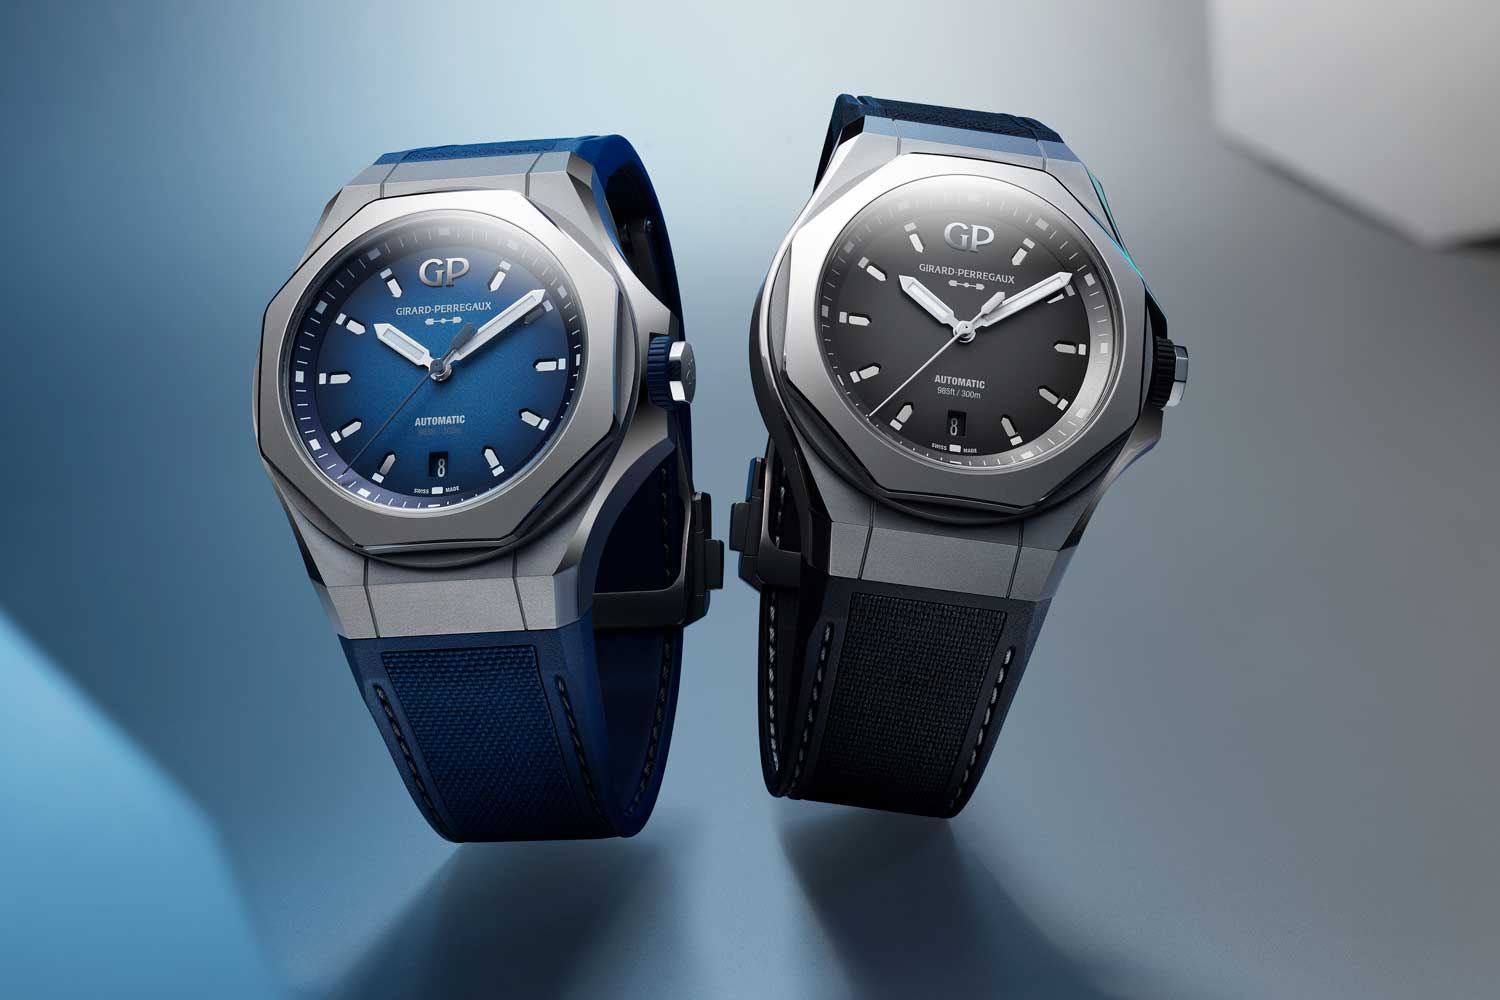 The Girard-Perregaux Laureato Absolute Ti 230 in two dial variations